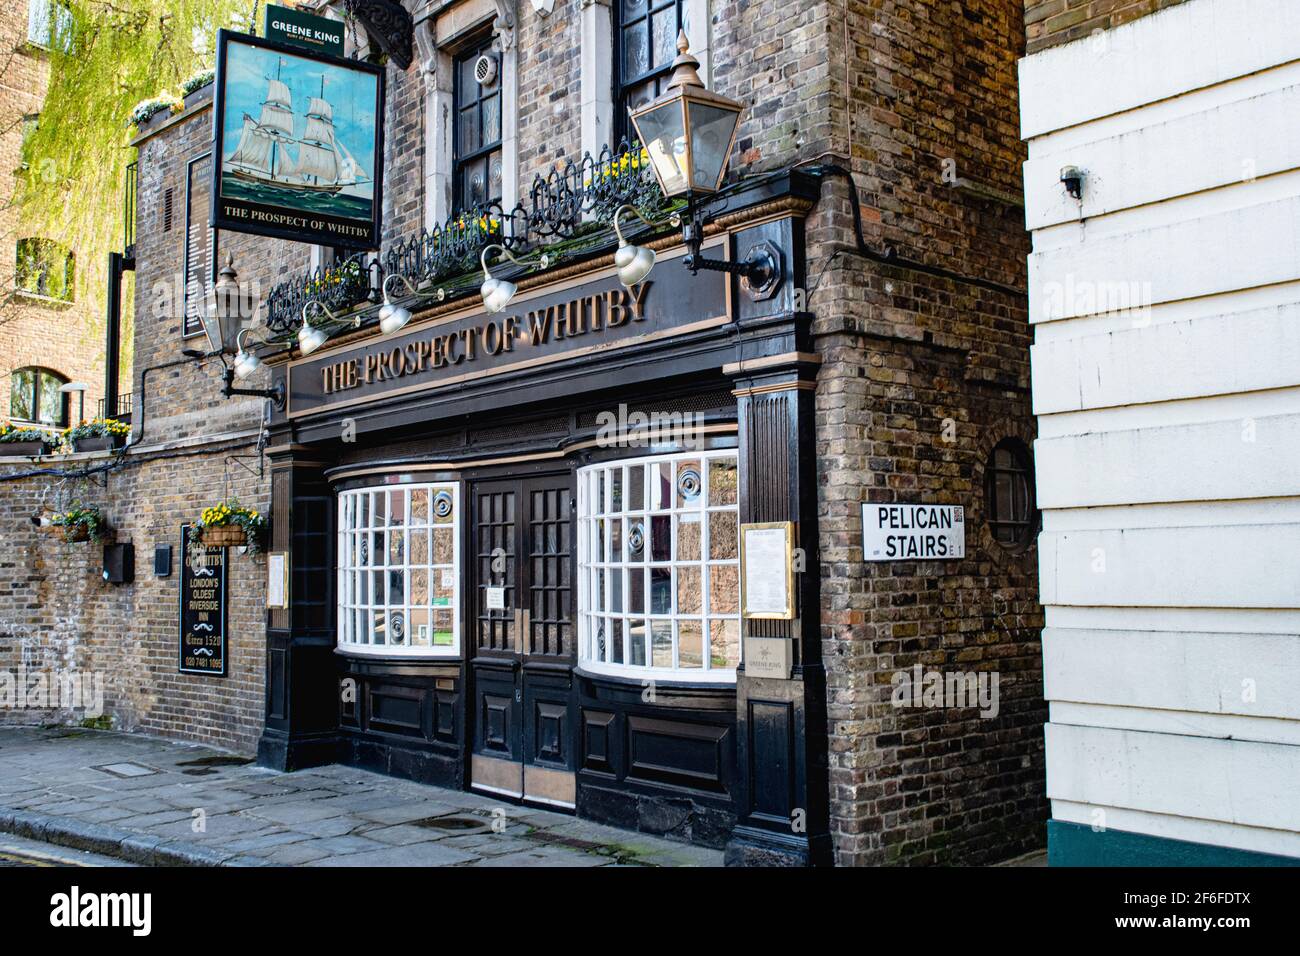 The Prospect of Whitby Pub, Wapping, London, UK Stock Photo